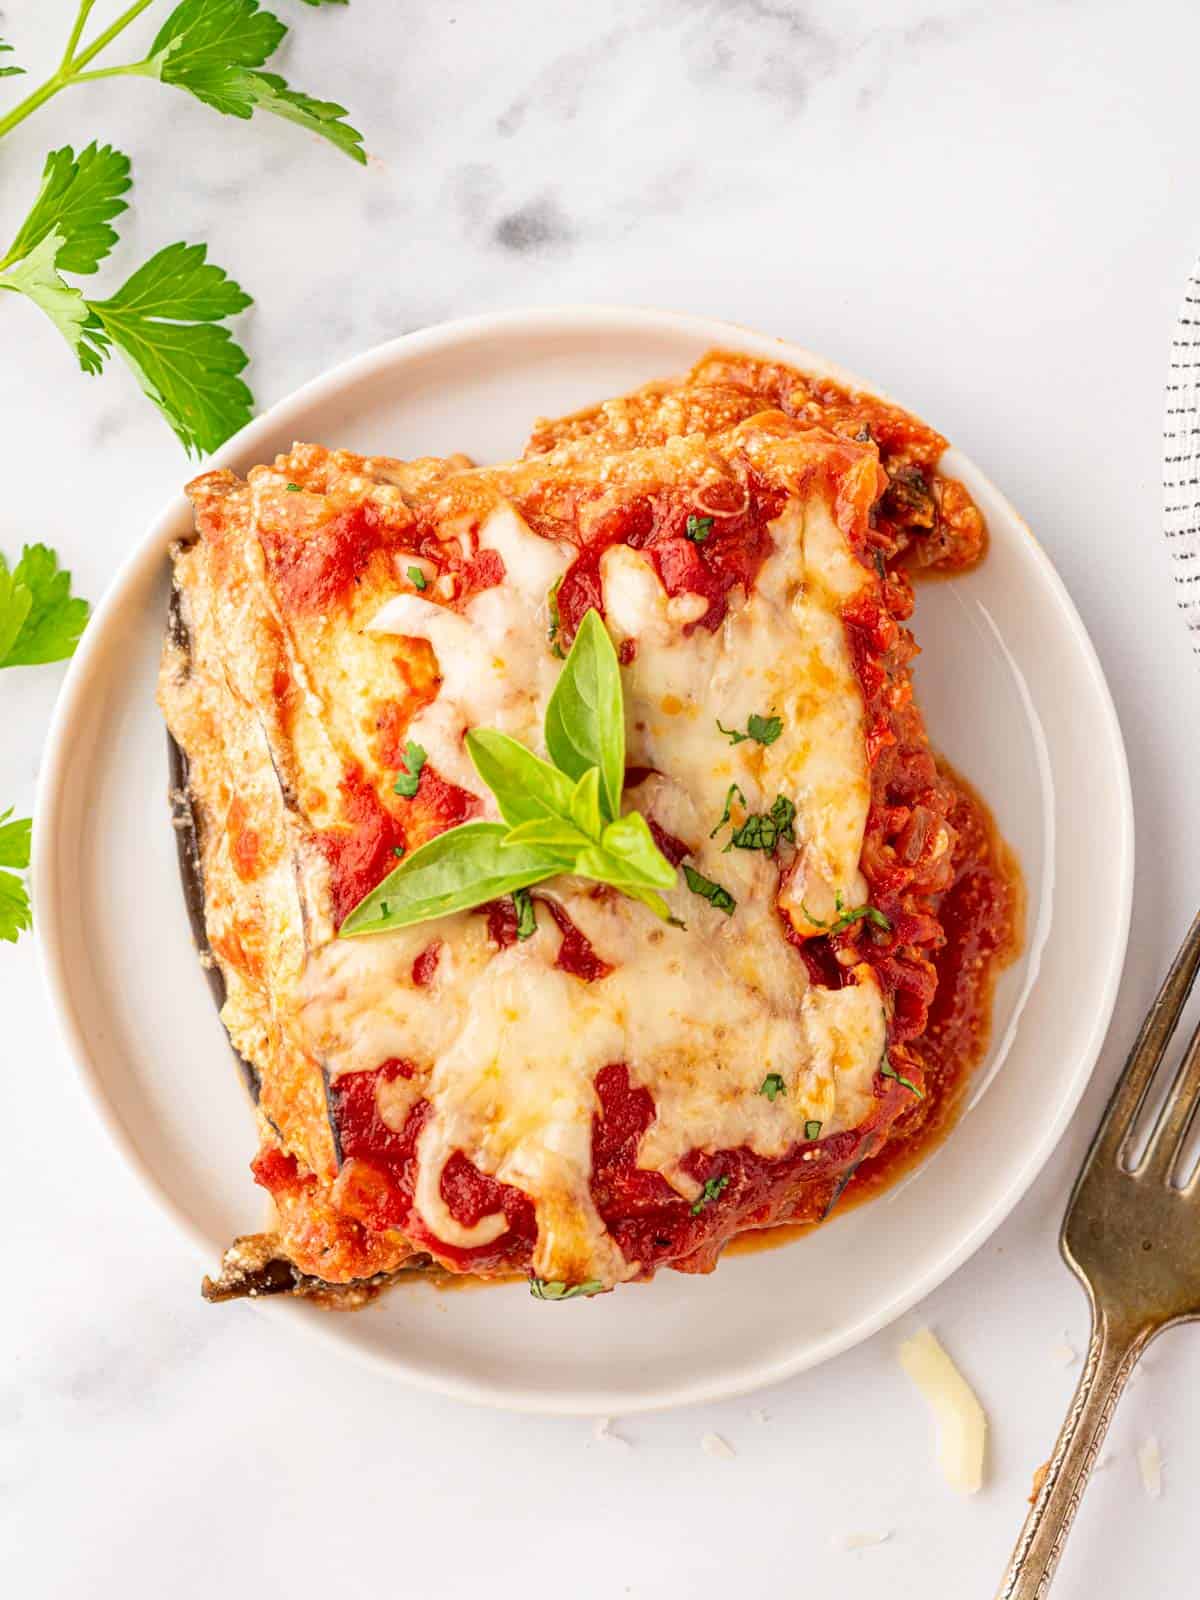 Piece of eggplant parmesan on a plate